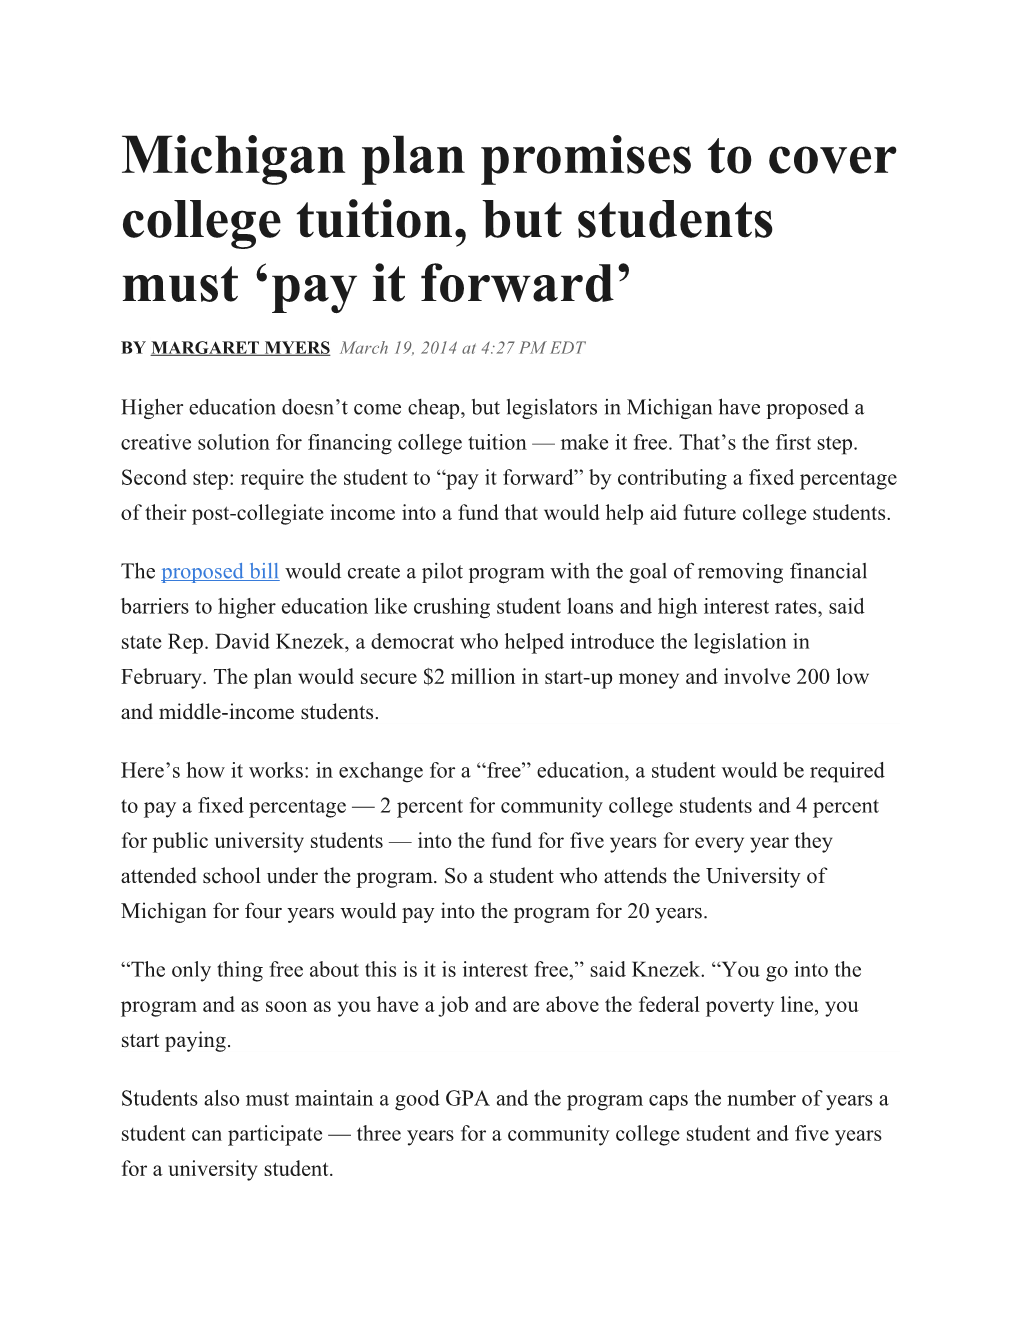 Michigan Plan Promises to Cover College Tuition, but Students Must Pay It Forward